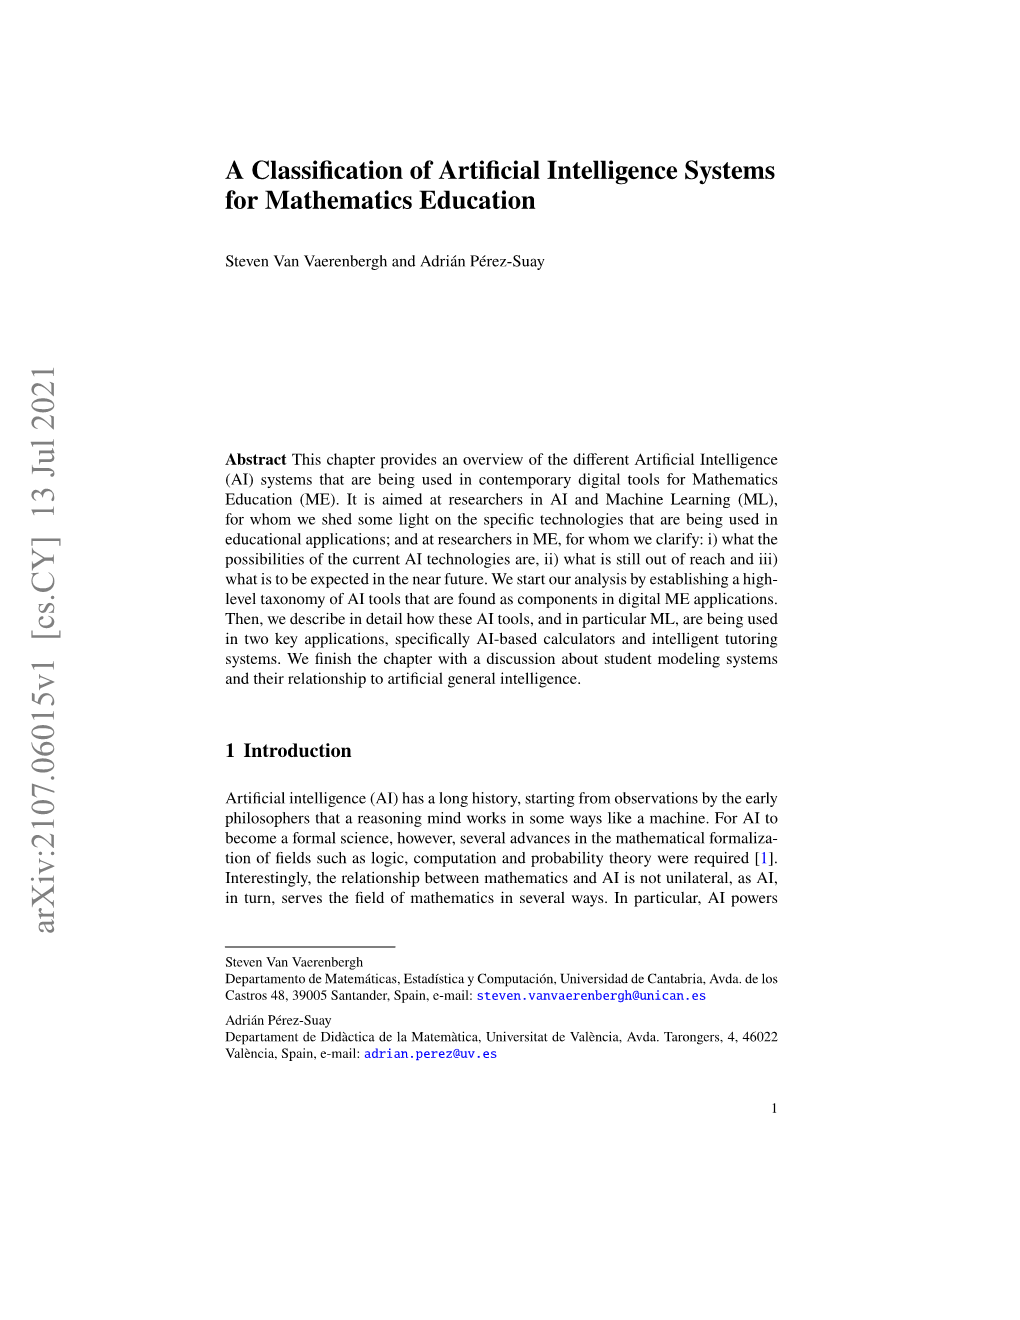 A Classification of Artificial Intelligence Systems for Mathematics Education